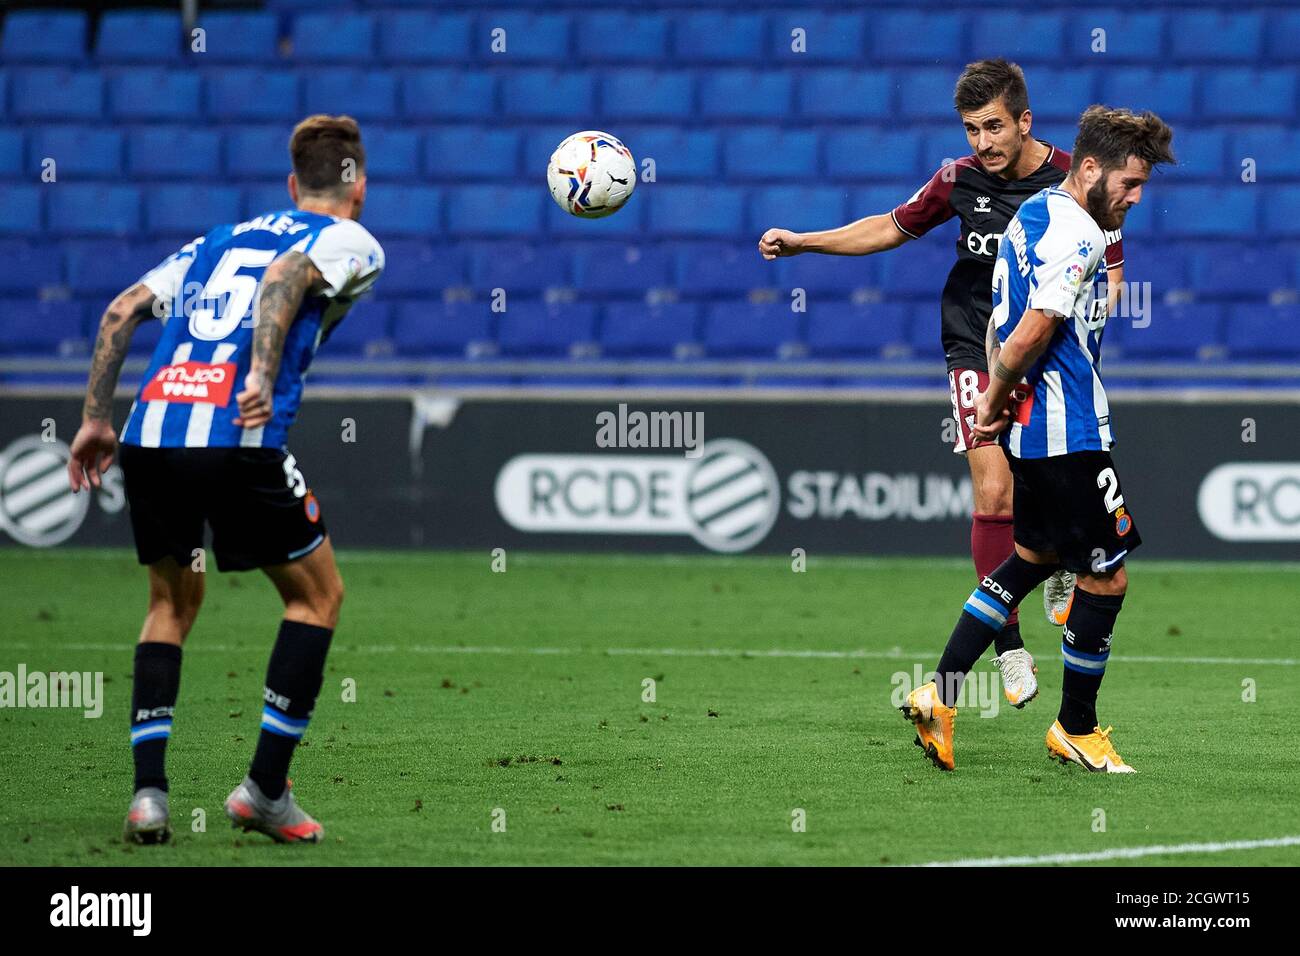 Barcelona, Spain. 12th Sep, 2020. Fuster during the Liga SmartBank match between RCD Espanyol and vs Albacete Balompie at RCD Stadium on September 12, 2020 in Barcelona, Spain. Credit: Dax Images/Alamy Live News Stock Photo